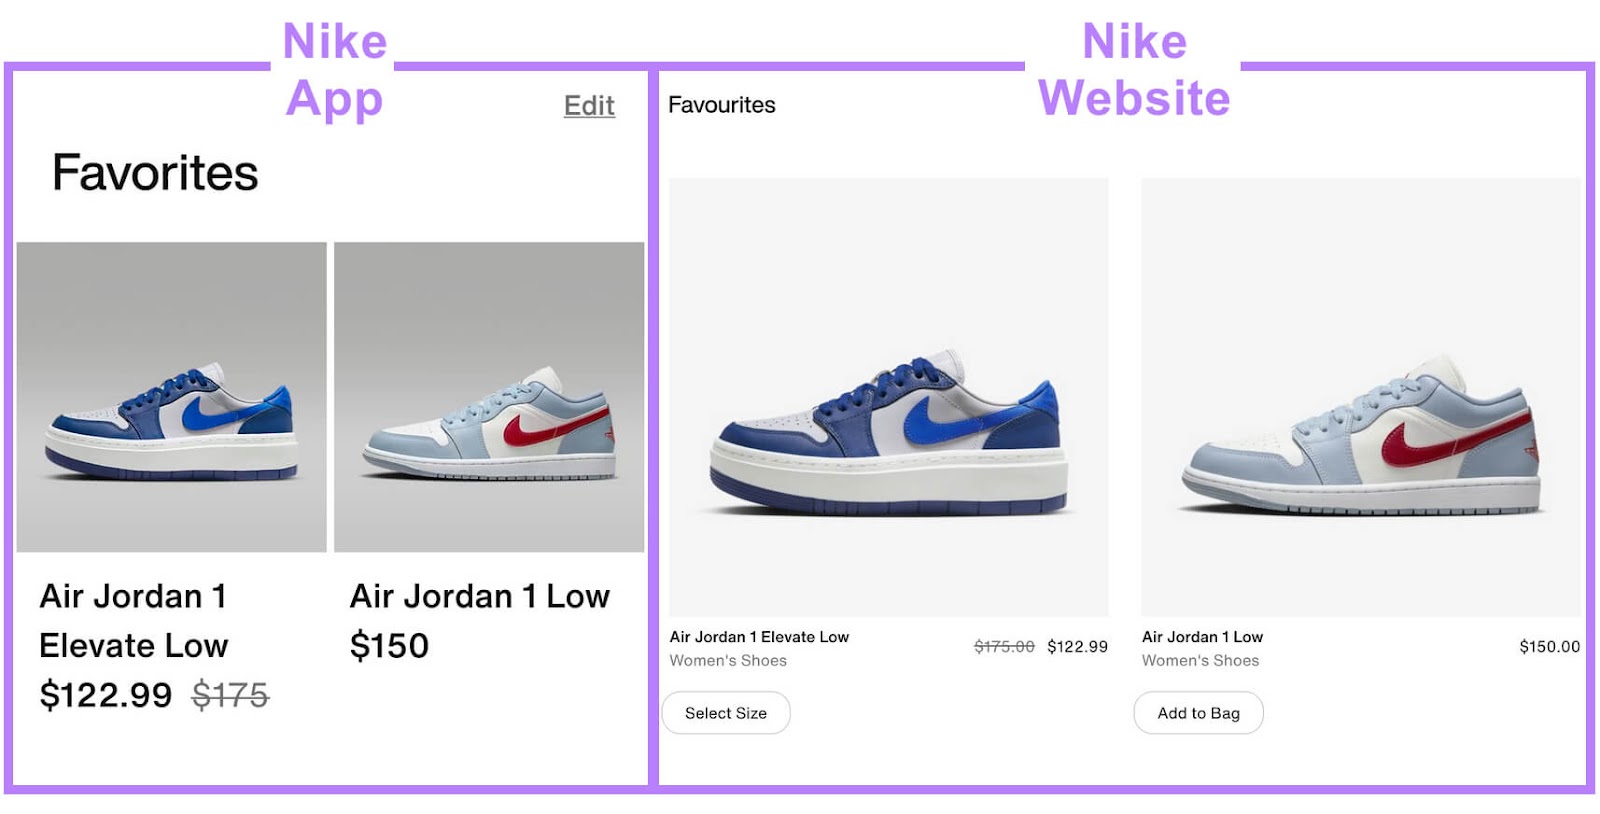 Air Jordan product listings in Nike's app (left) and website (right)